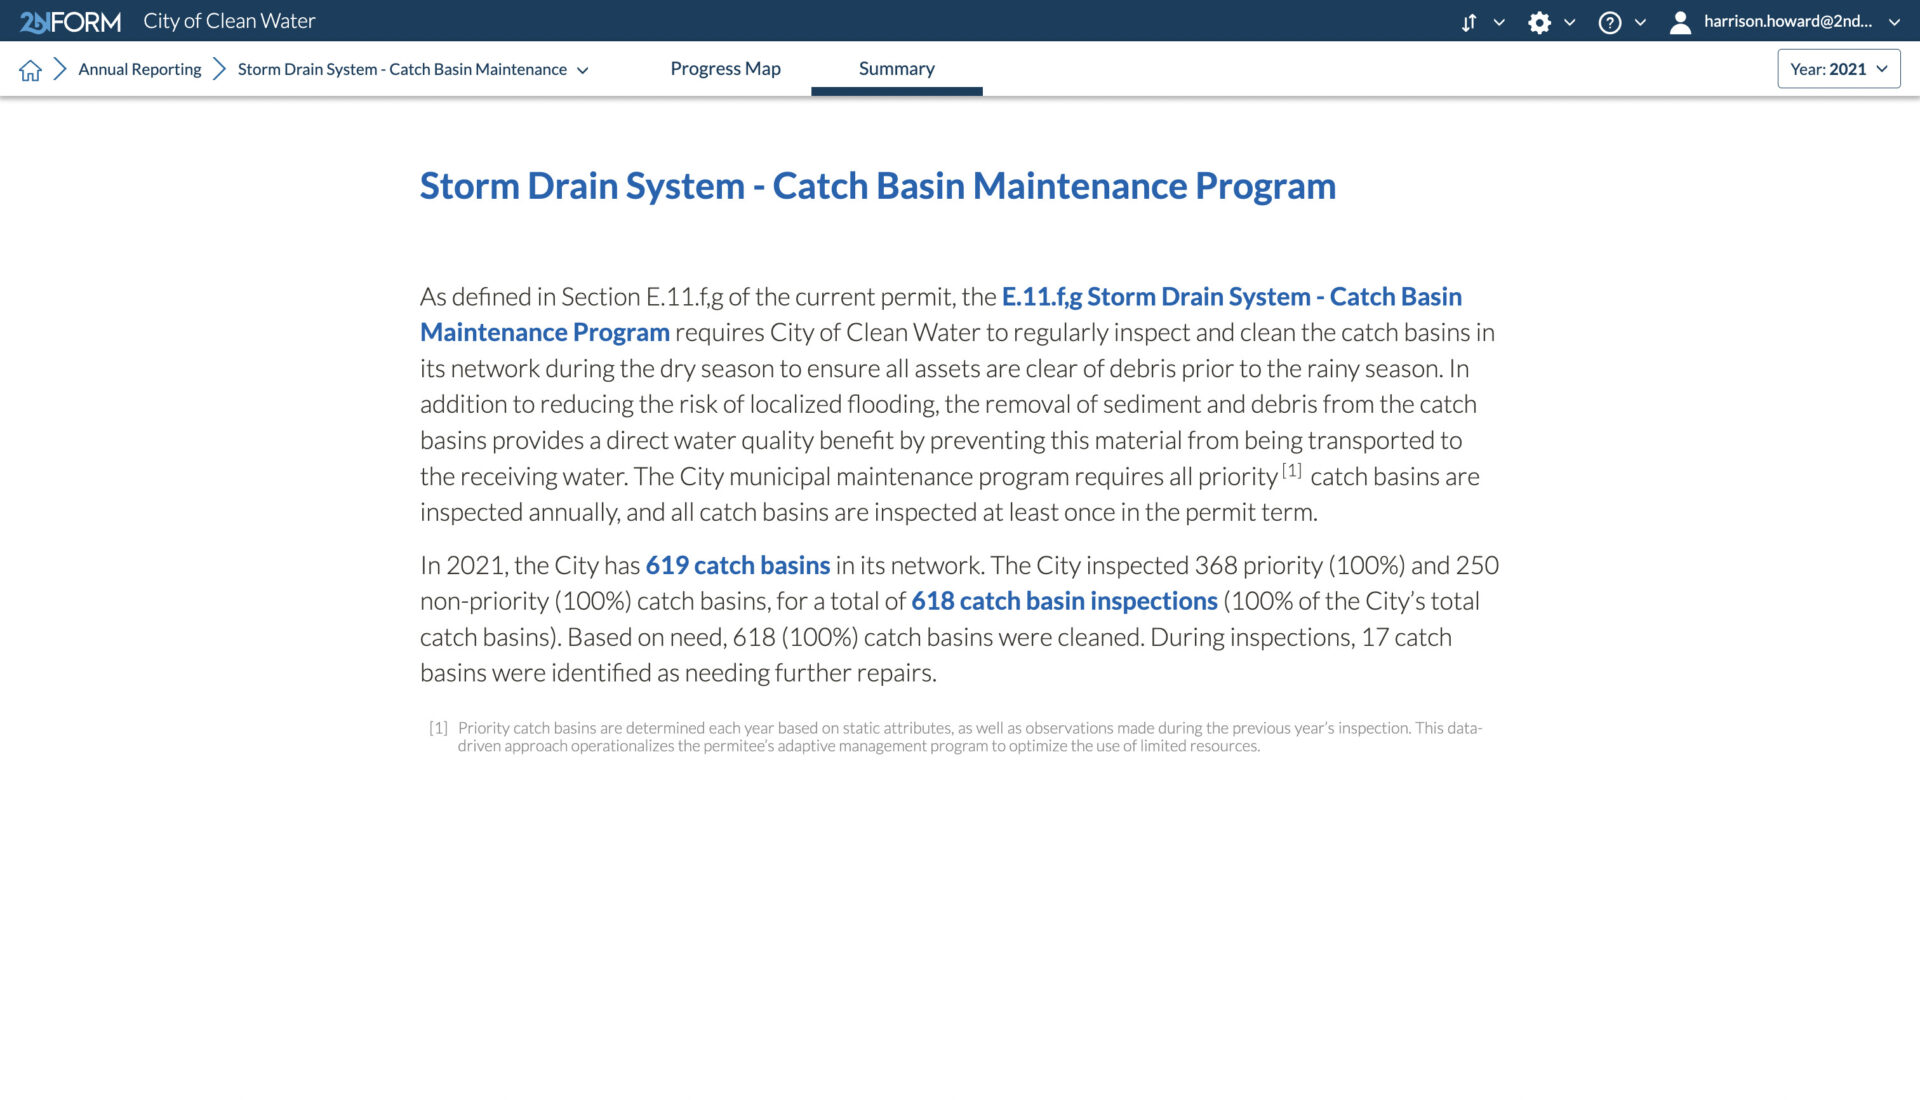 2NFORM stormwater compliance software generates narrative summaries with your numbers